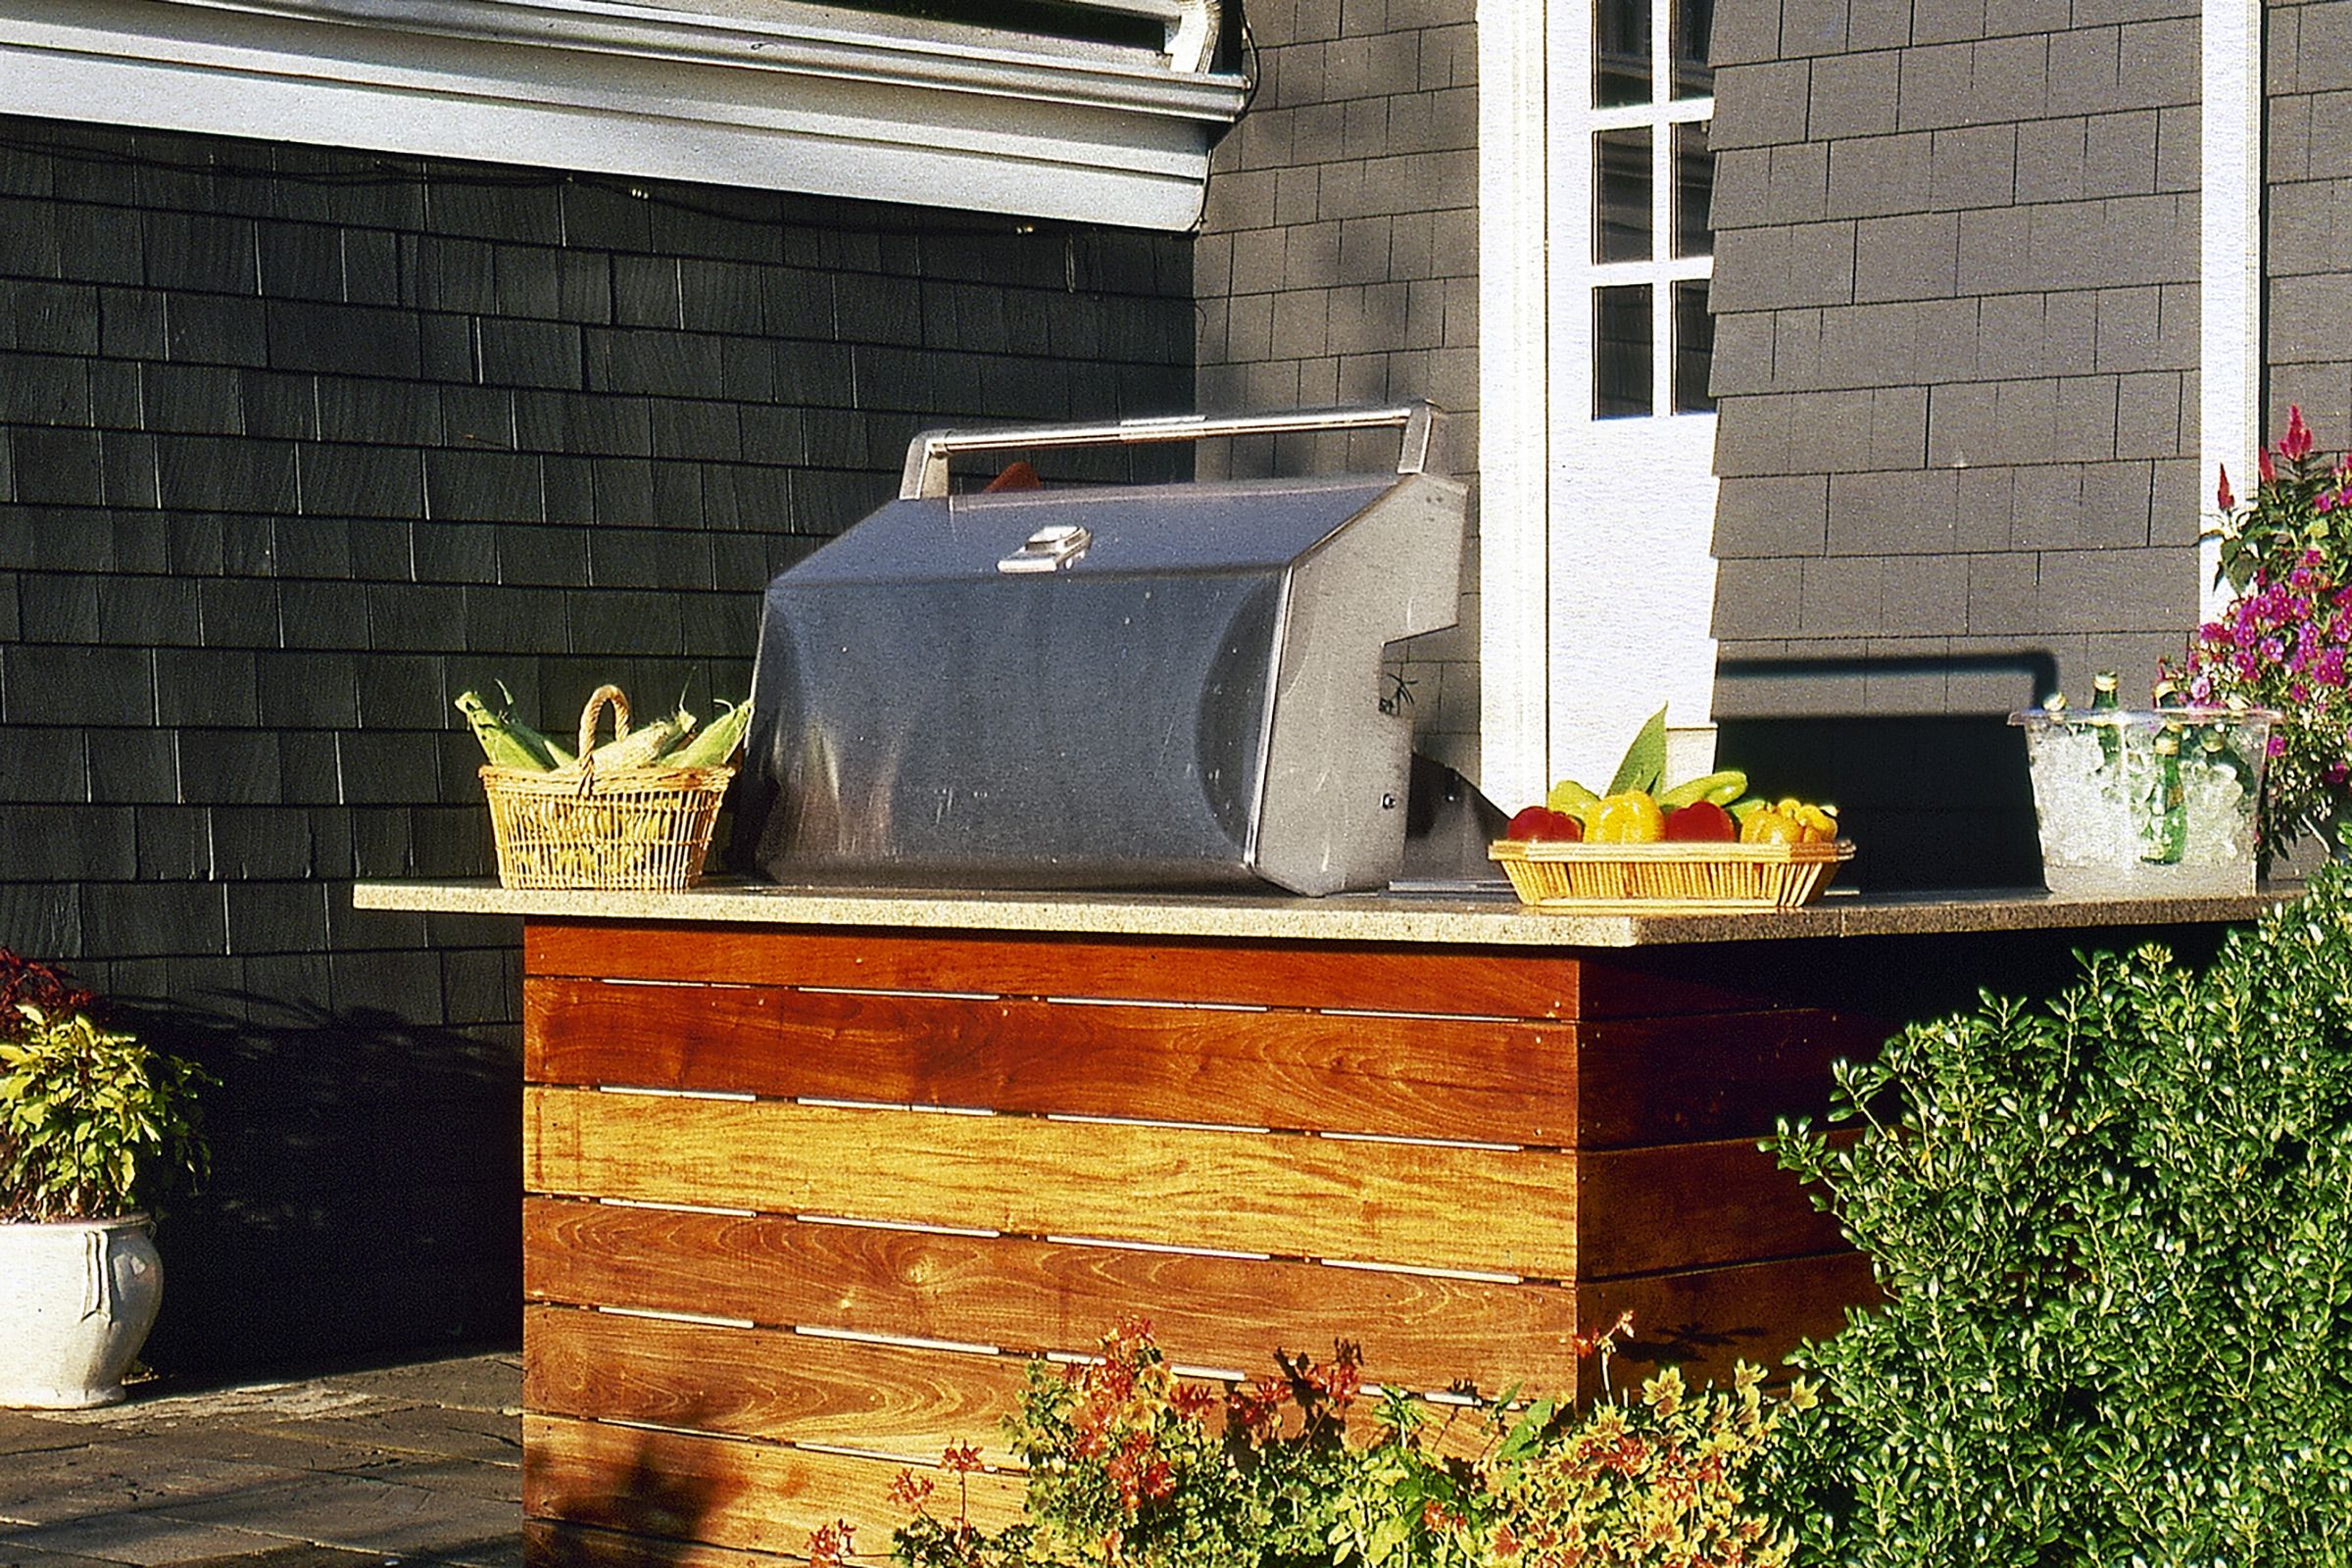 Outdoor Kitchen Planning Guide - This Old House